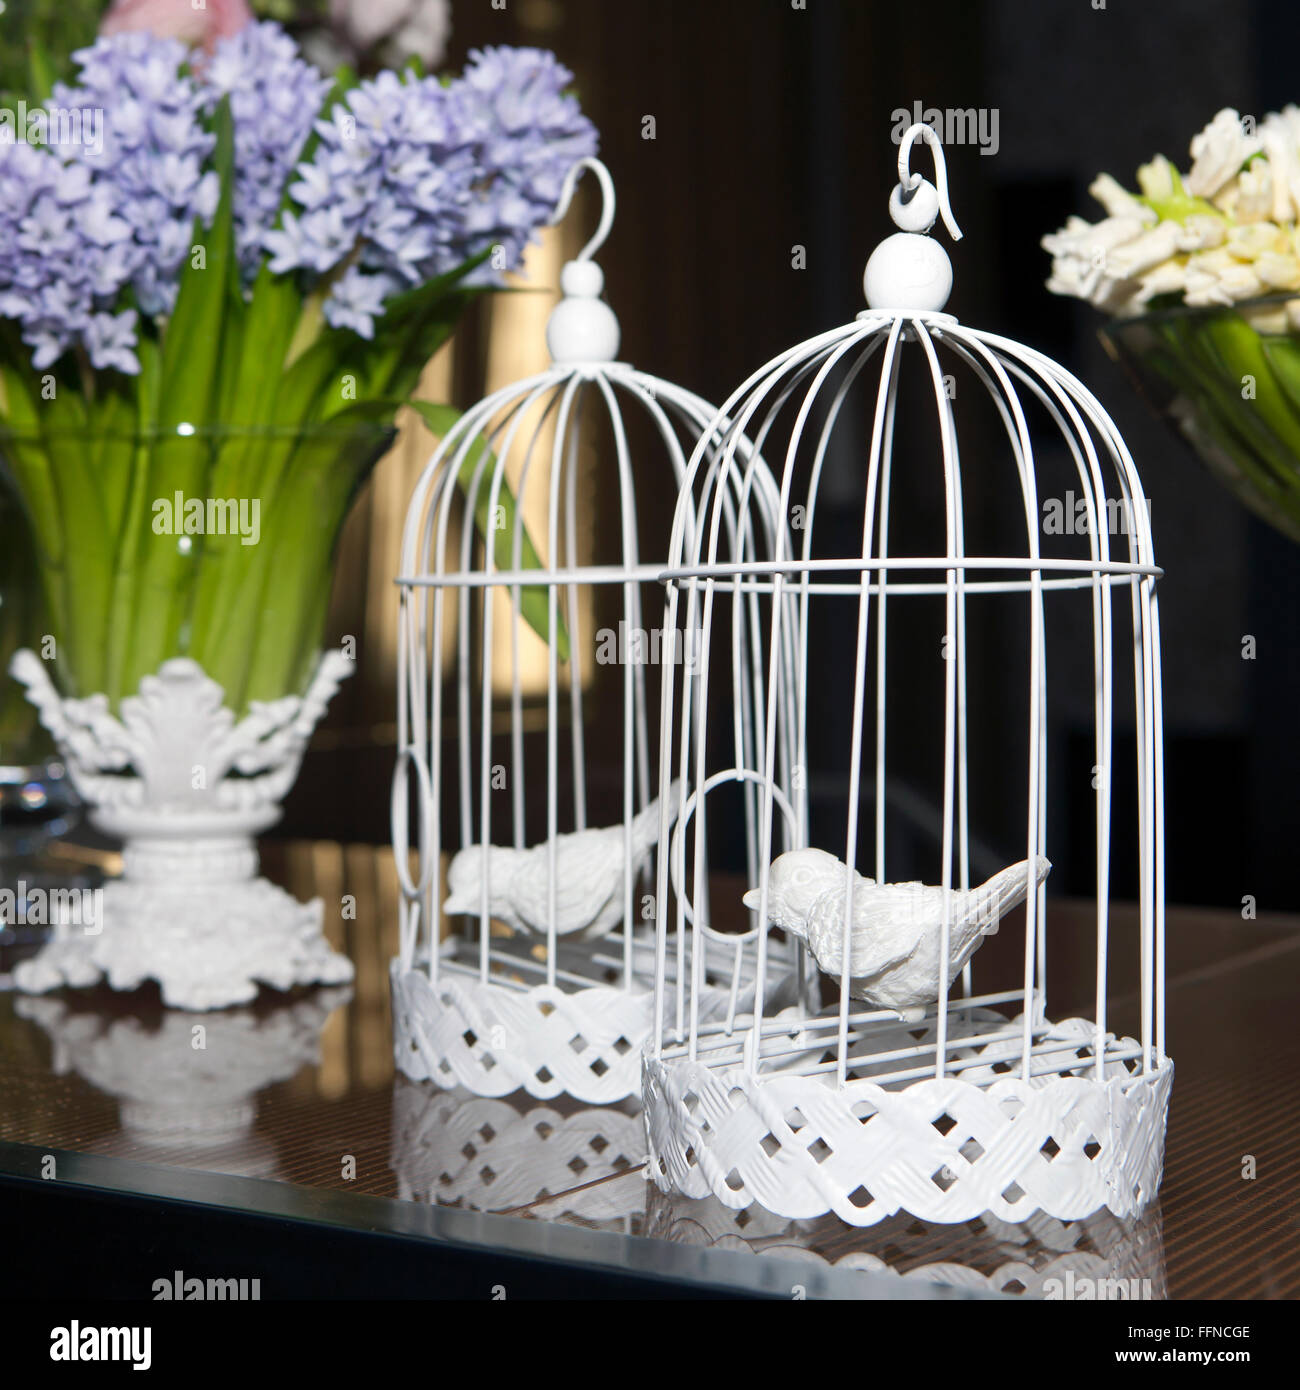 Easter decoration with cage, birds and flowers Stock Photo